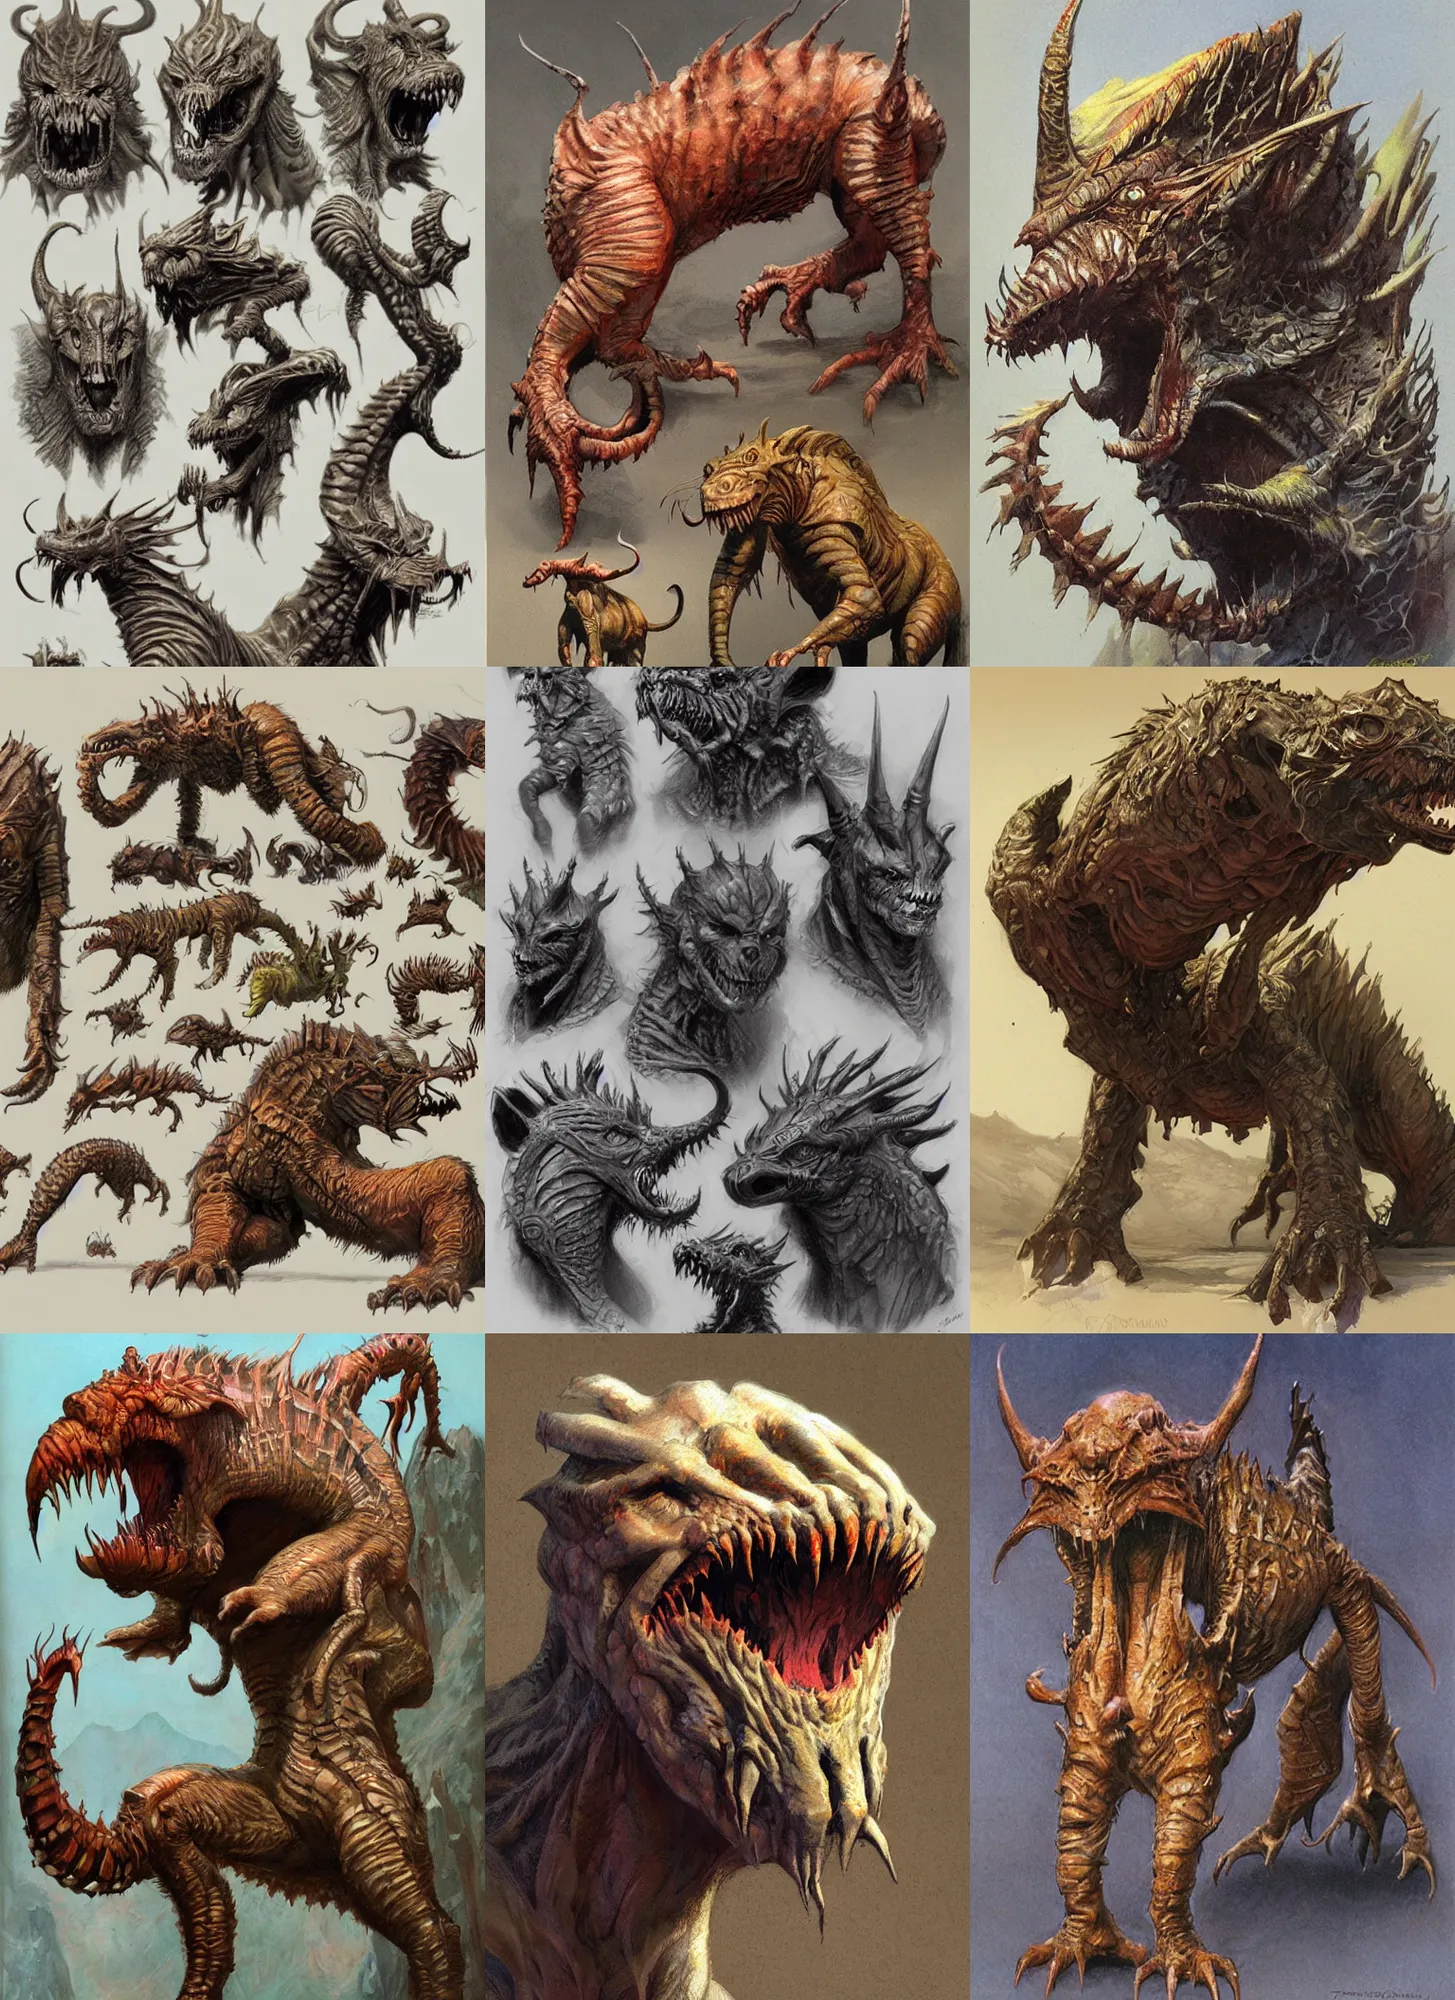 Prompt: creature designs by james gurney